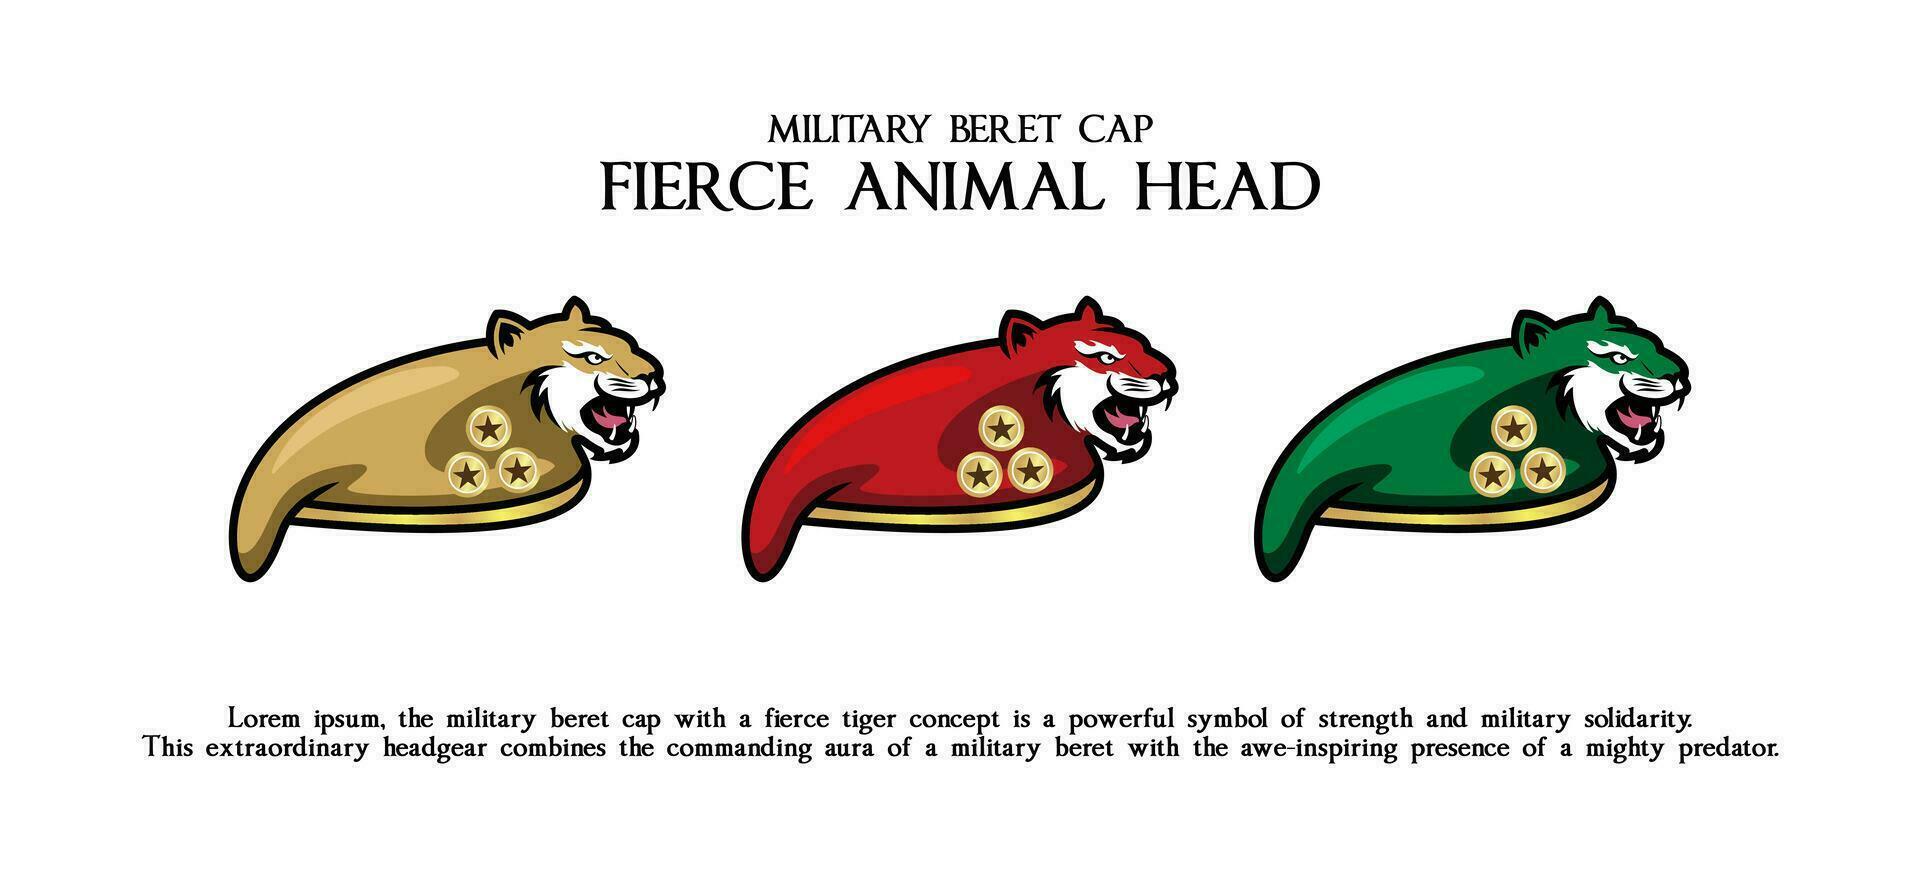 Colorful military cap beret logo design with tiger head vector illustration